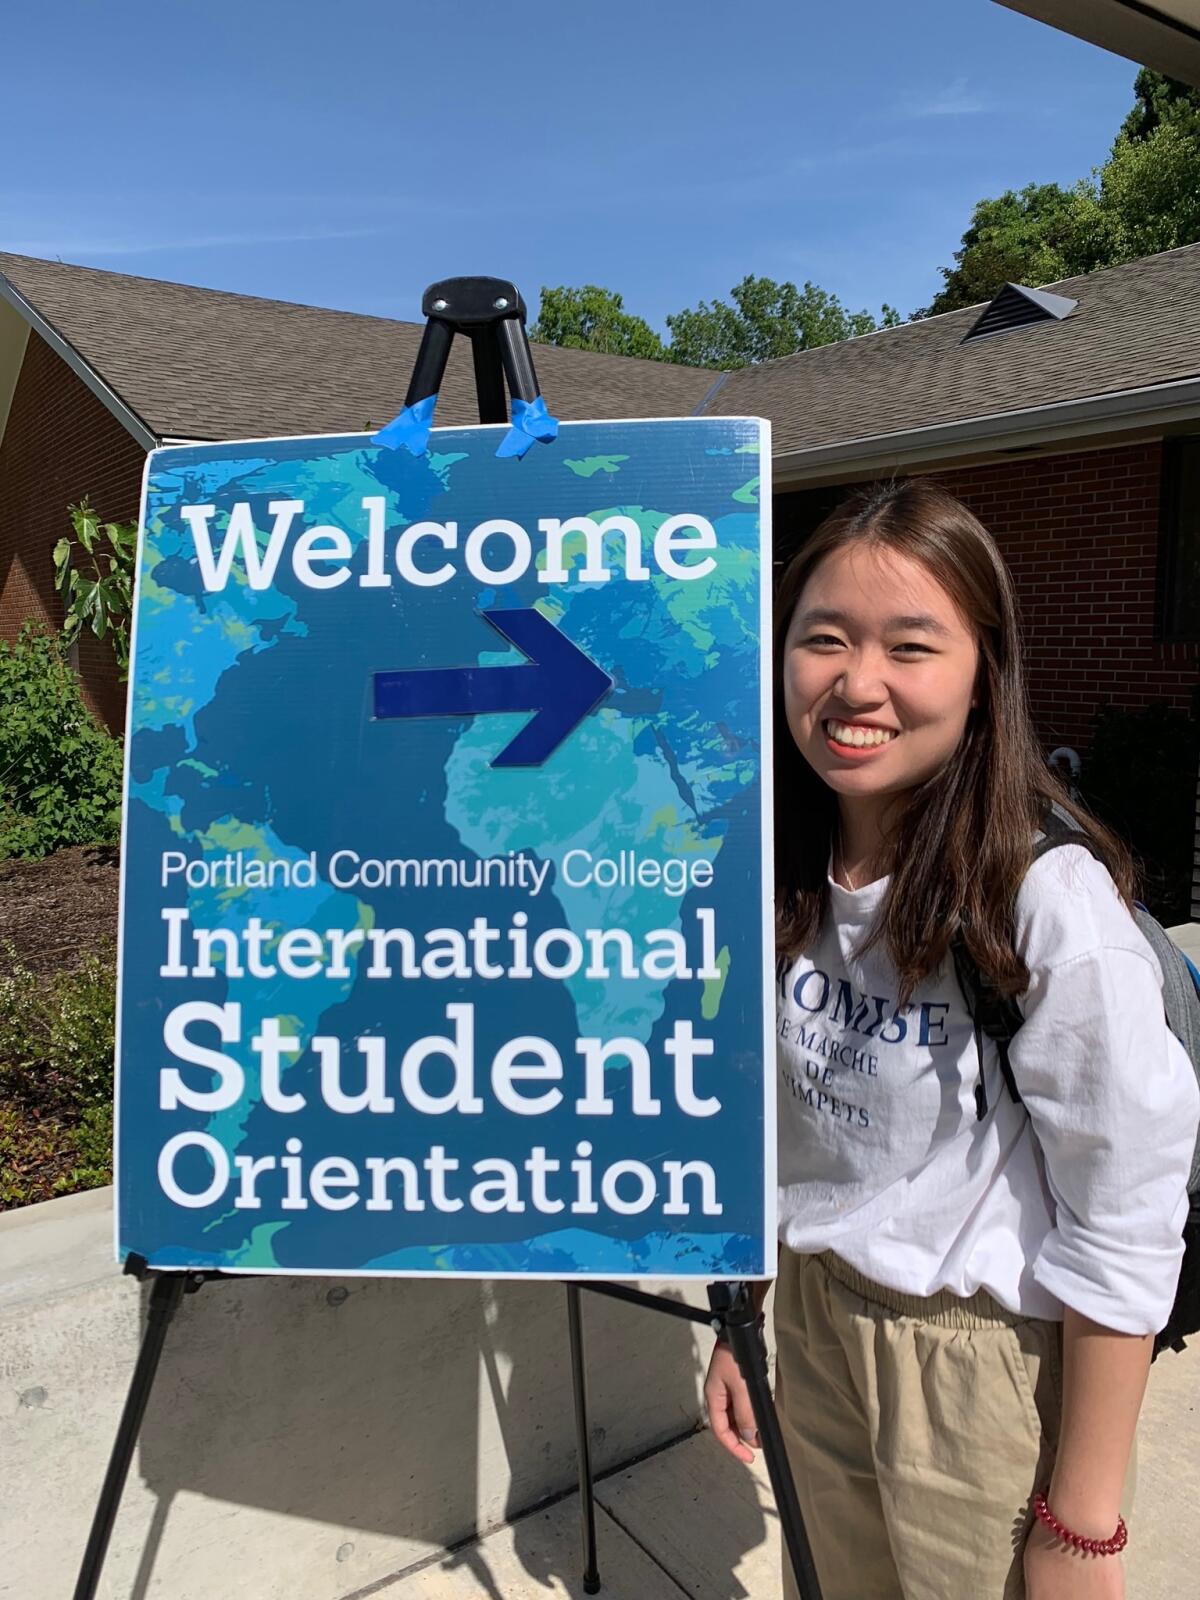 Trang Tran, 20, is pictured on her first day of school in the United States at Portland Community College in Oregon, thanks to sponsorship from Giving It Back to Kids.